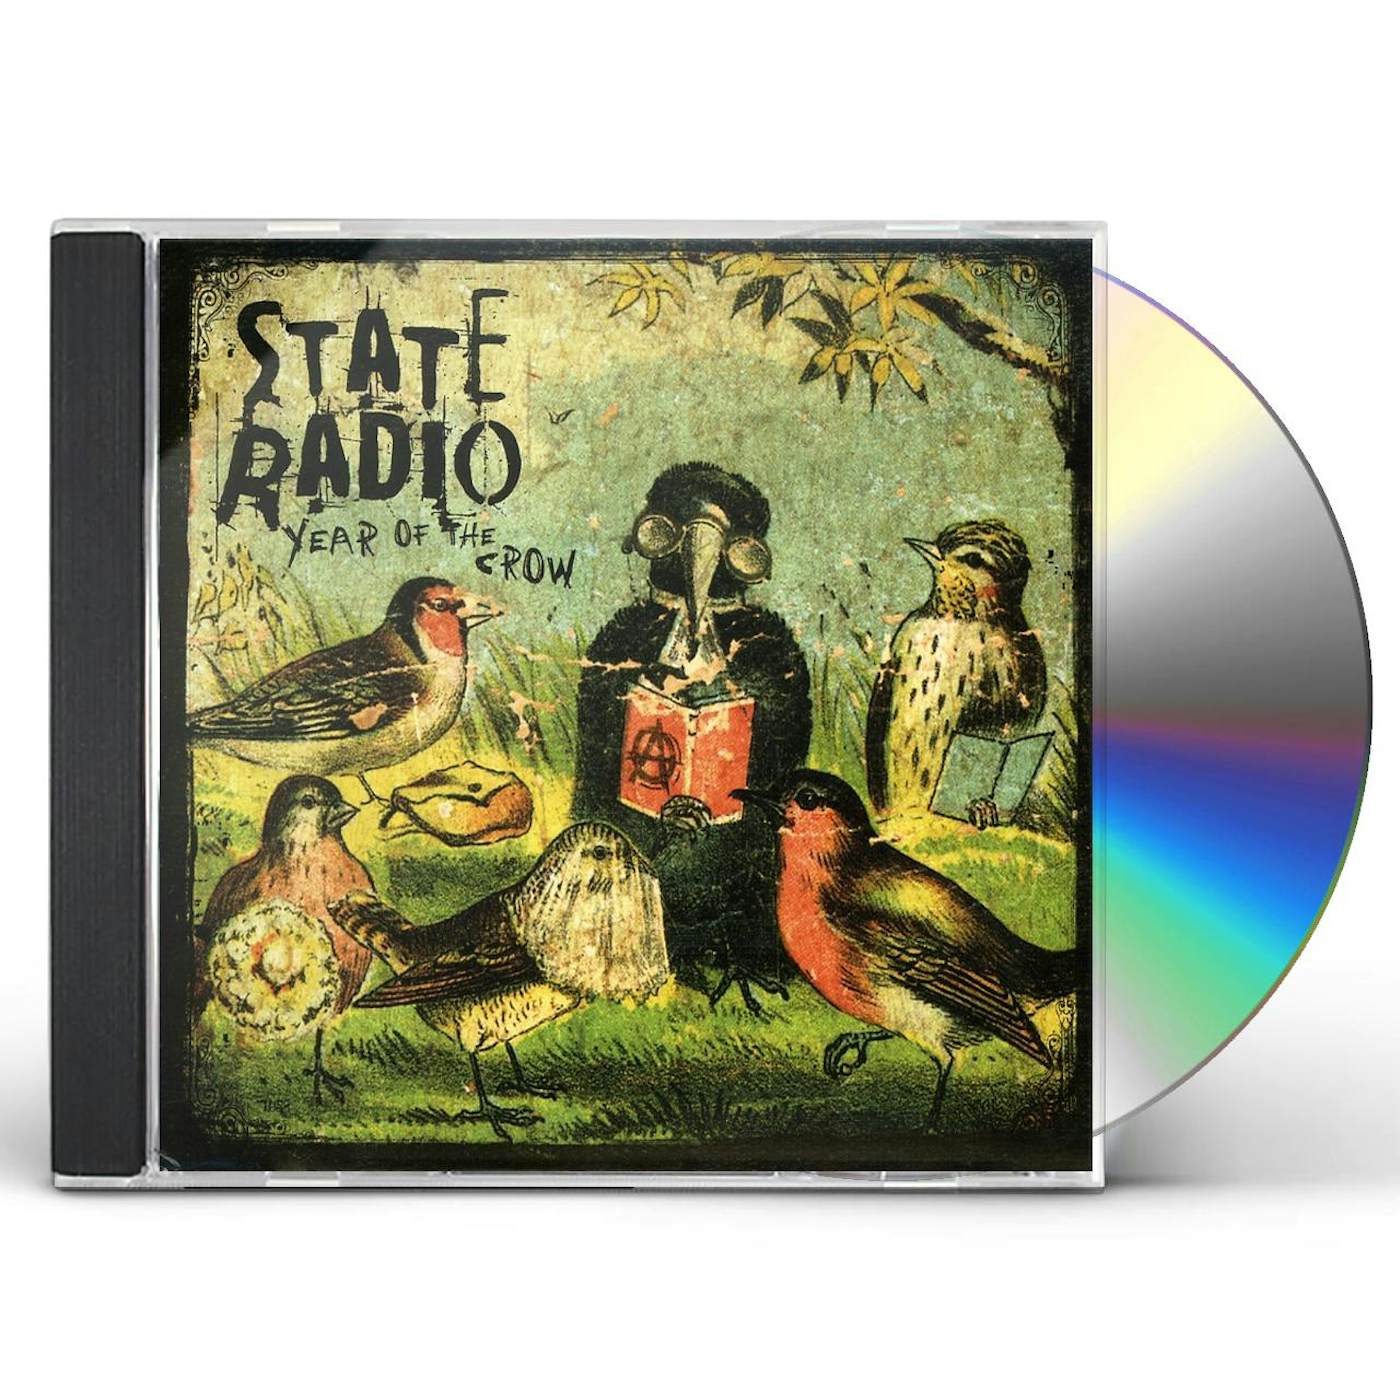 State Radio YEAR OF THE CROW CD